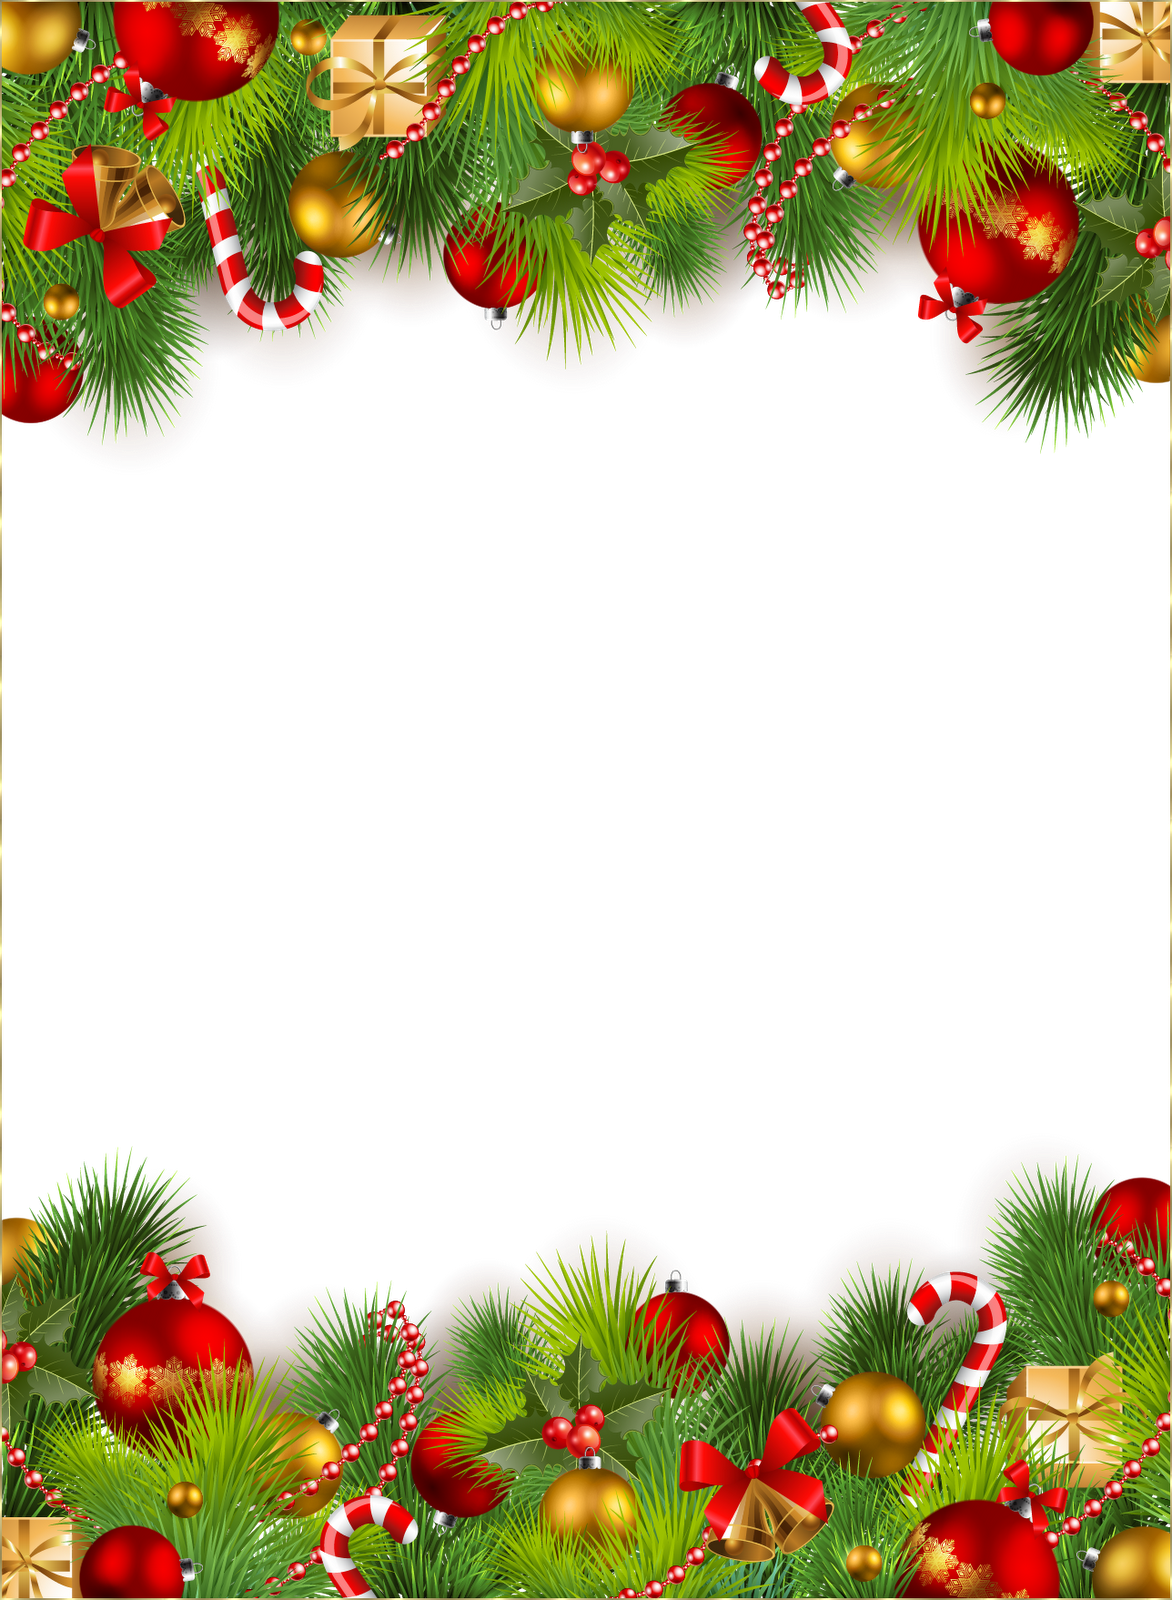 Island clipart holiday island. Image result for christmas